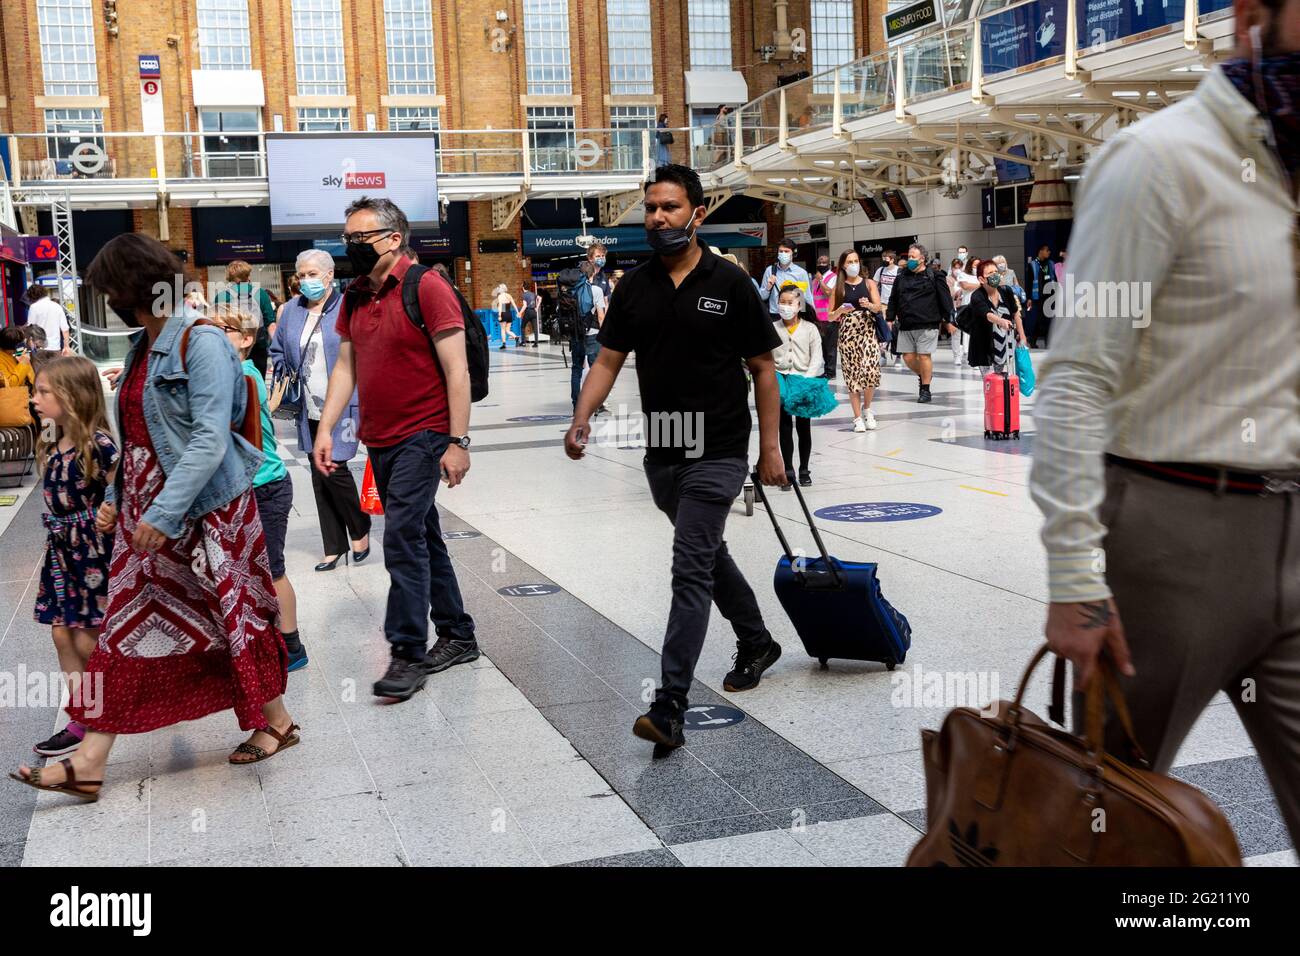 London, United Kingdom, June 7, 2021. Commuters walk through the entrance of London Liverpool Street train station as Coronavirus restrictions ease and the economy start to pick up.  The Prime Minister Boris Johnson has set a road map on easing the restrictions. (Dominika Zarzycka/Alamy) Credit: Dominika Zarzycka/Alamy Live News Stock Photo